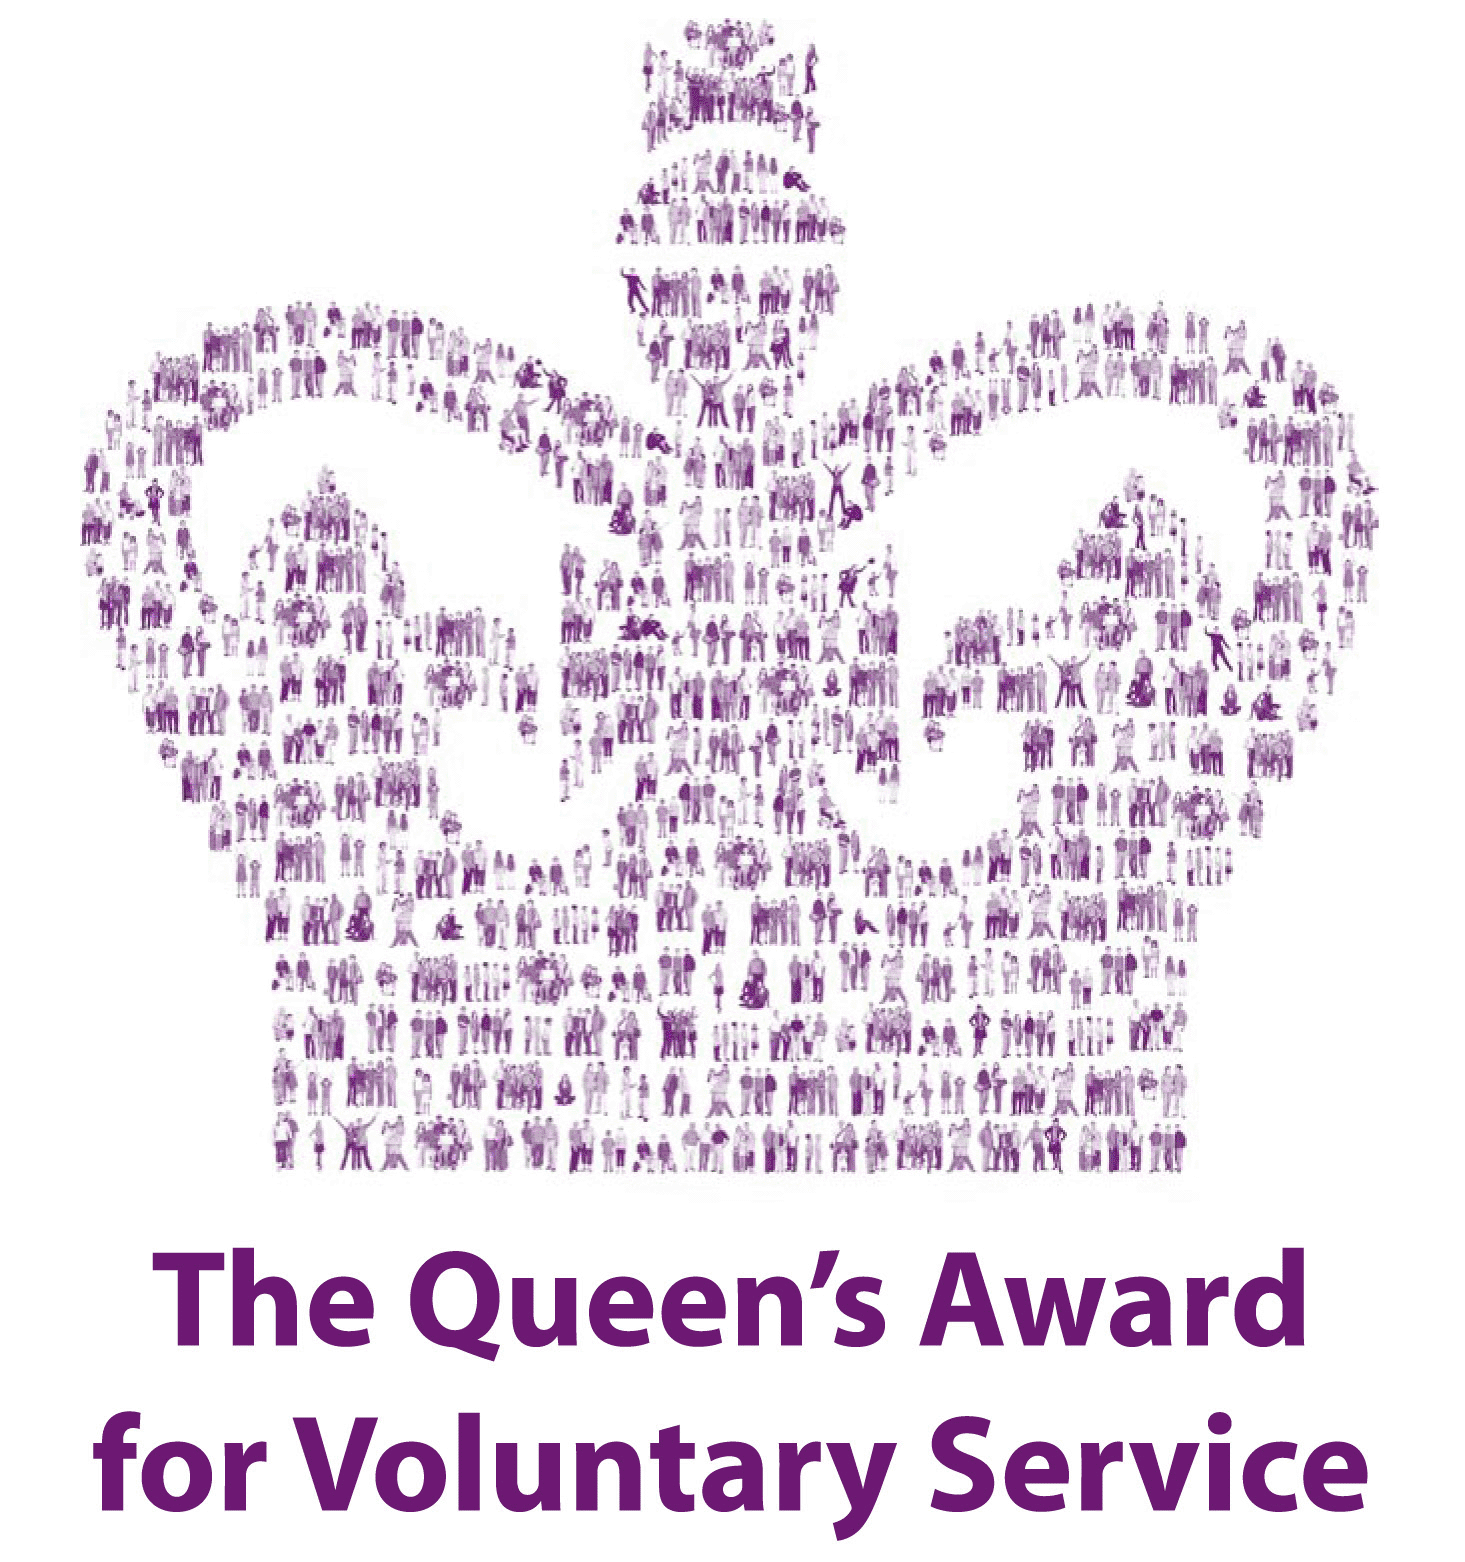 Nominate for The Queen’s Award for Voluntary Service